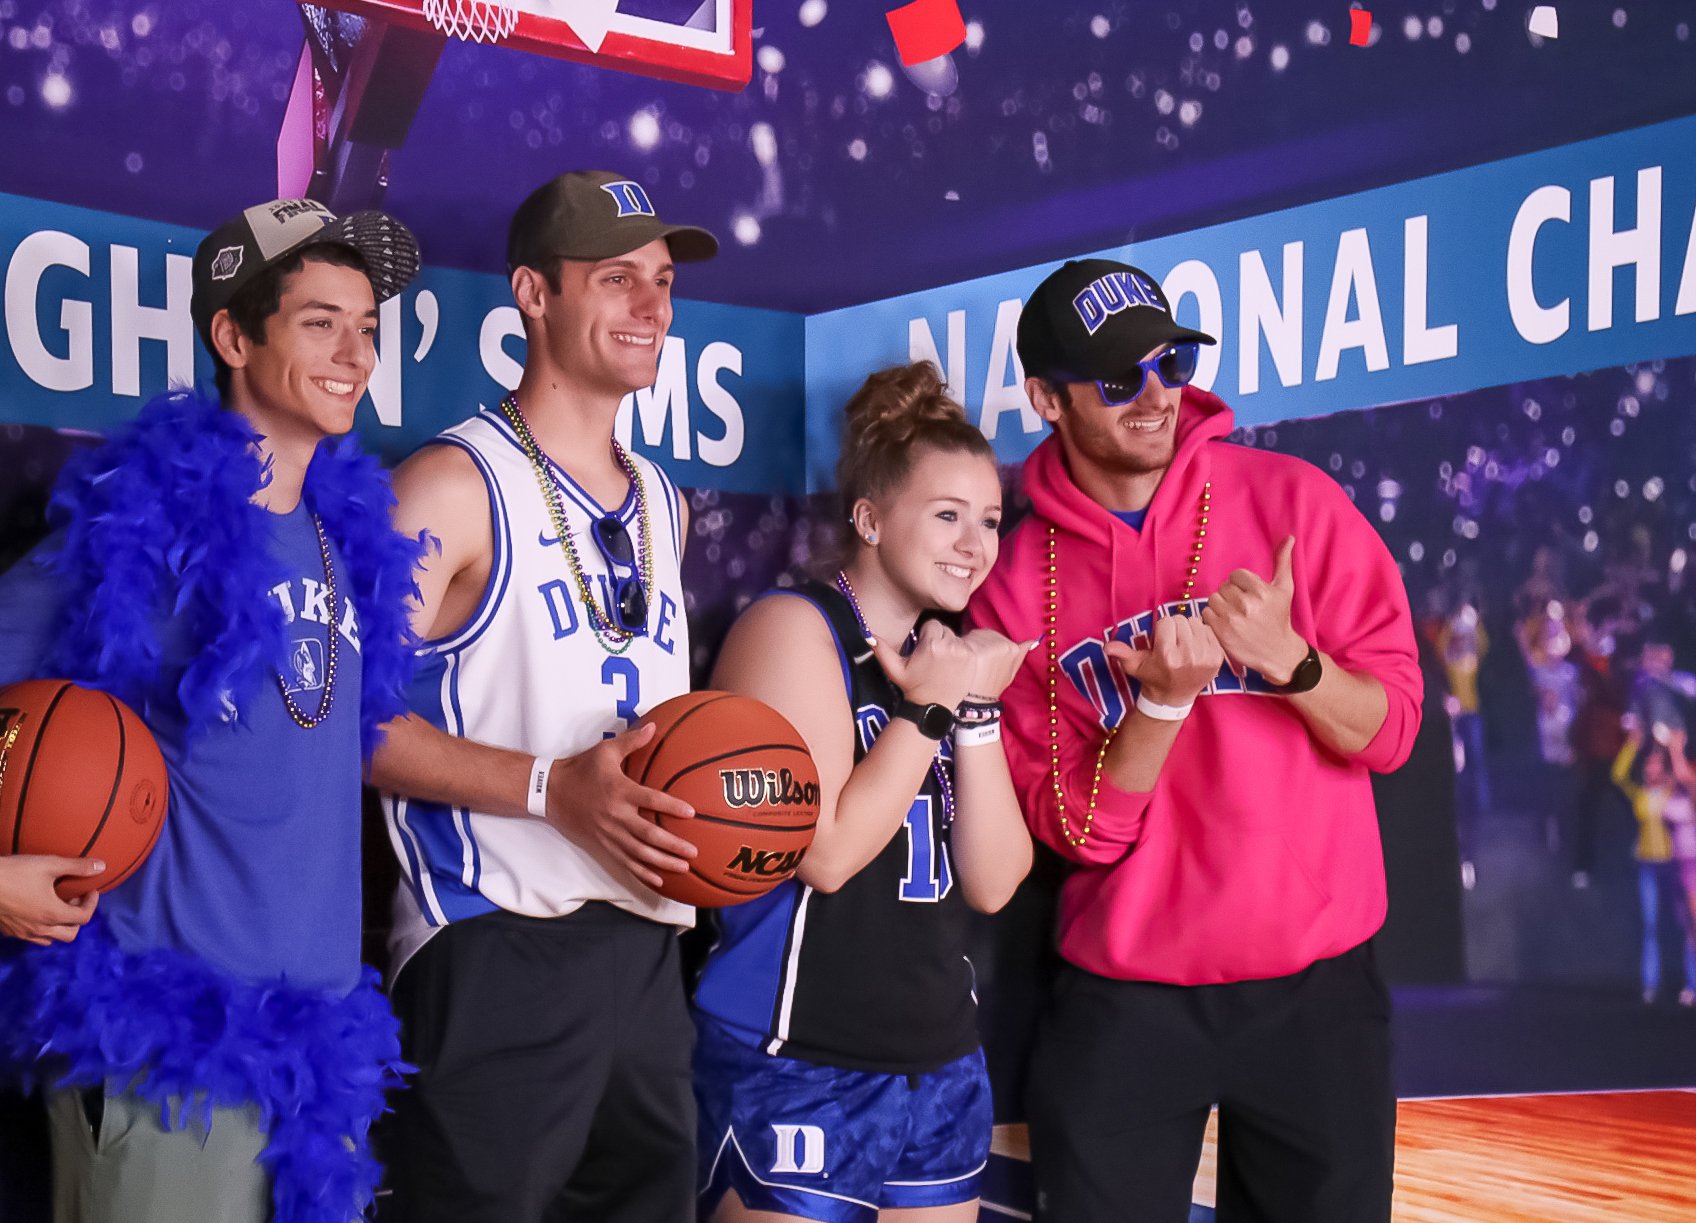 4 people wearing Duke swag pose for a photo.. The two on the left hold basketballs while the two on the right put their fists together in a sideways thumbs up. 